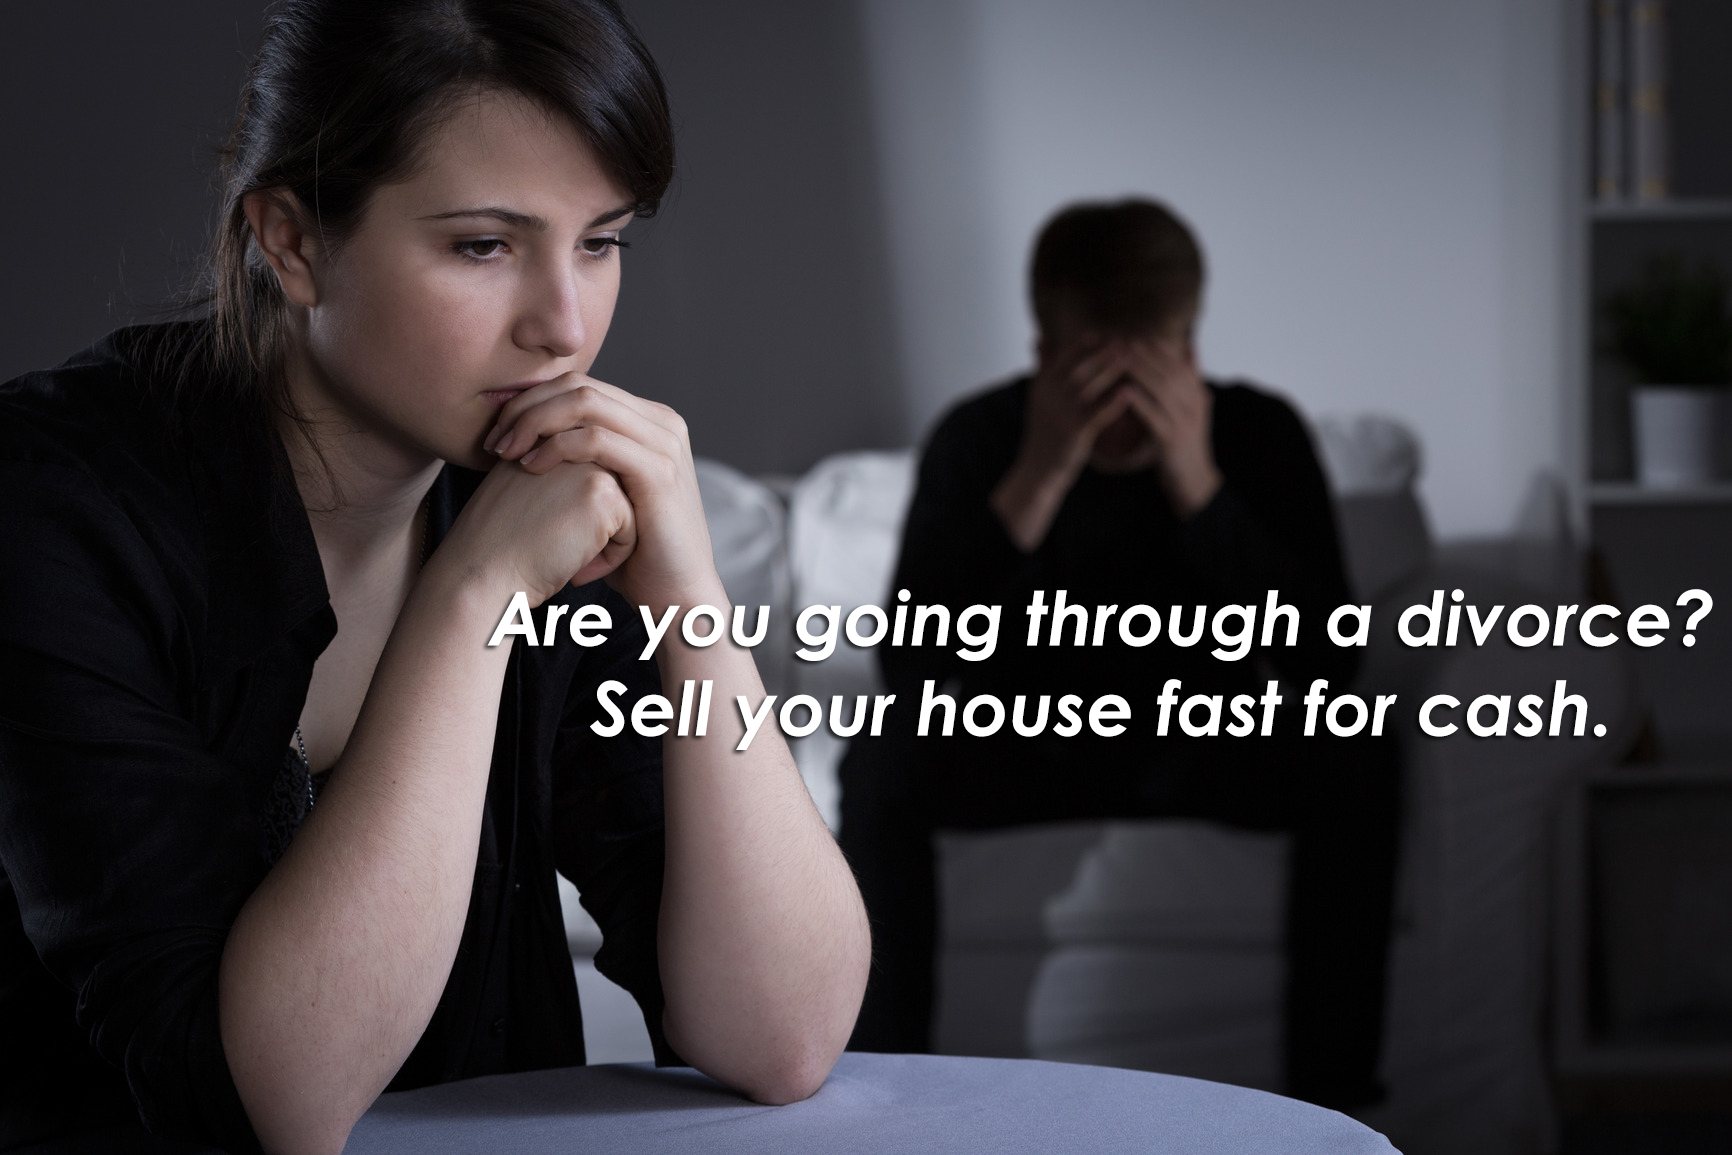 Sell your house in a divorce with HighestCashOffer.com